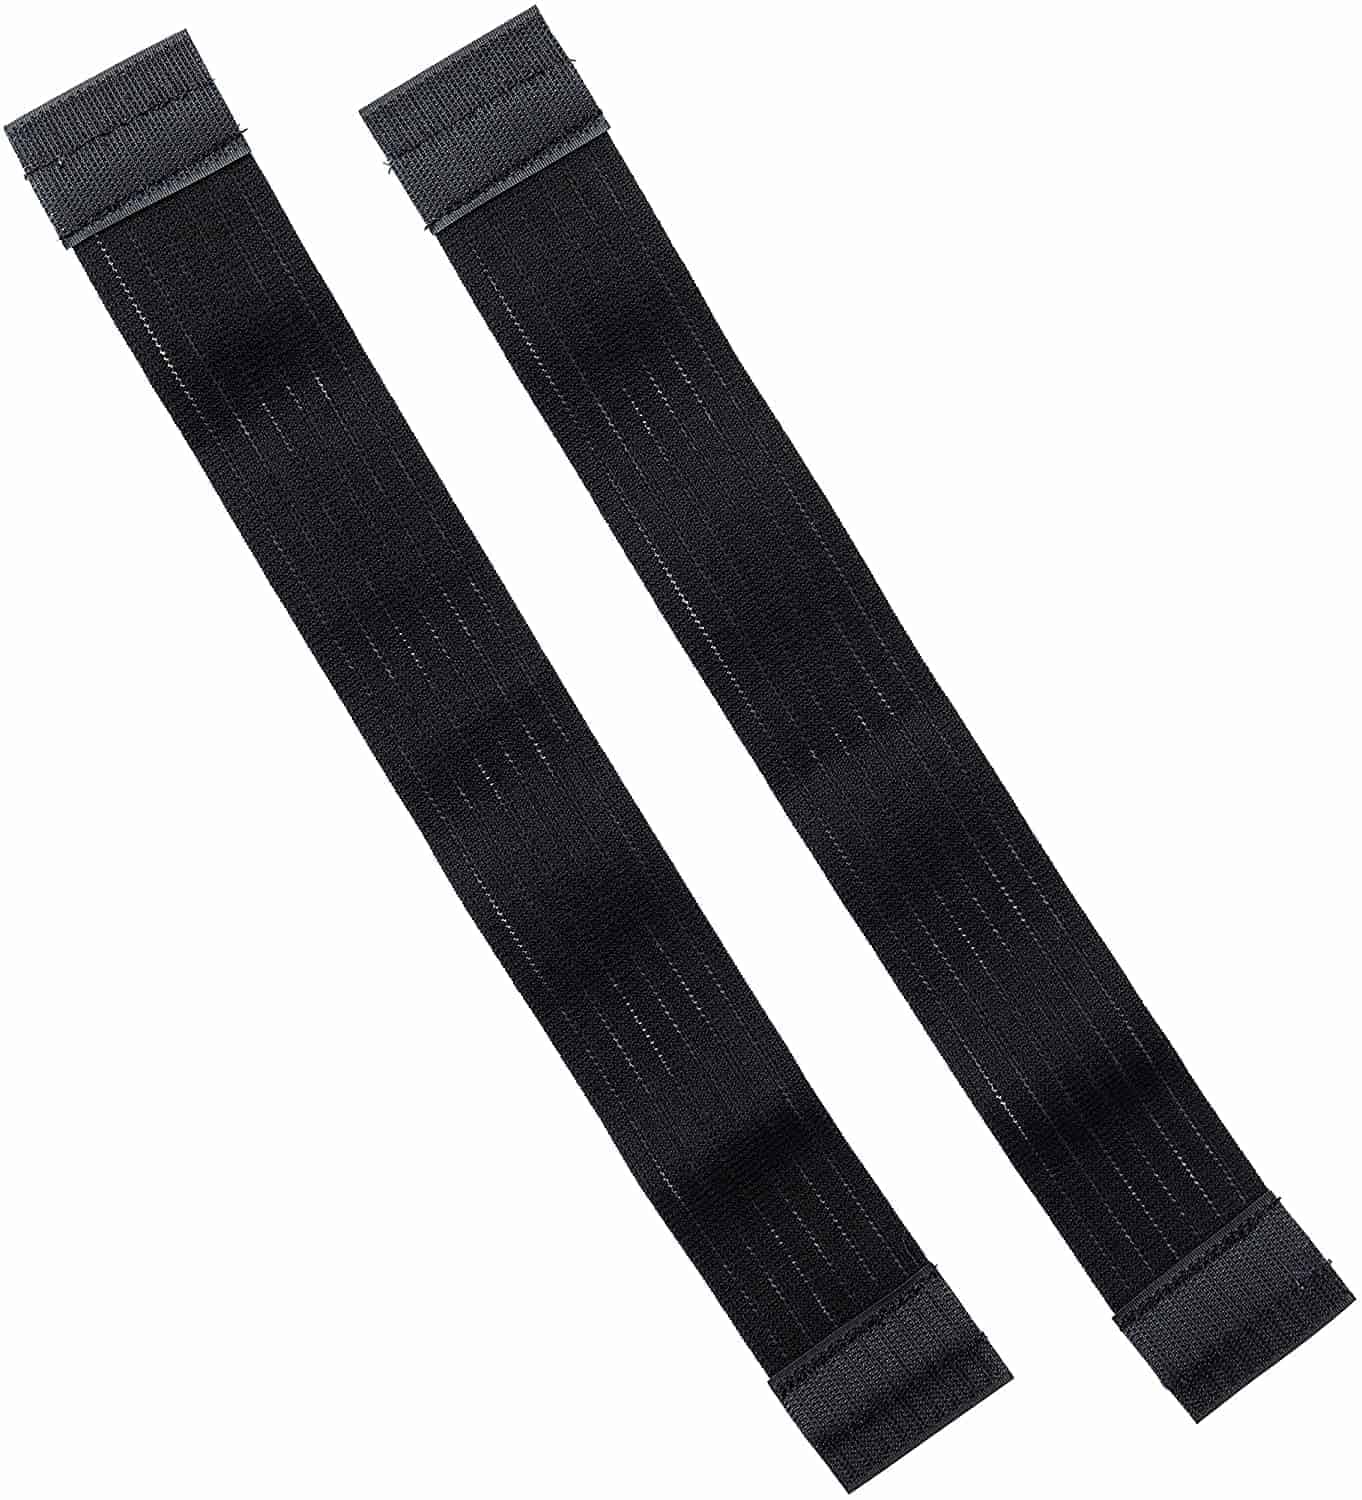 Secondary image for “Replacement Straps”